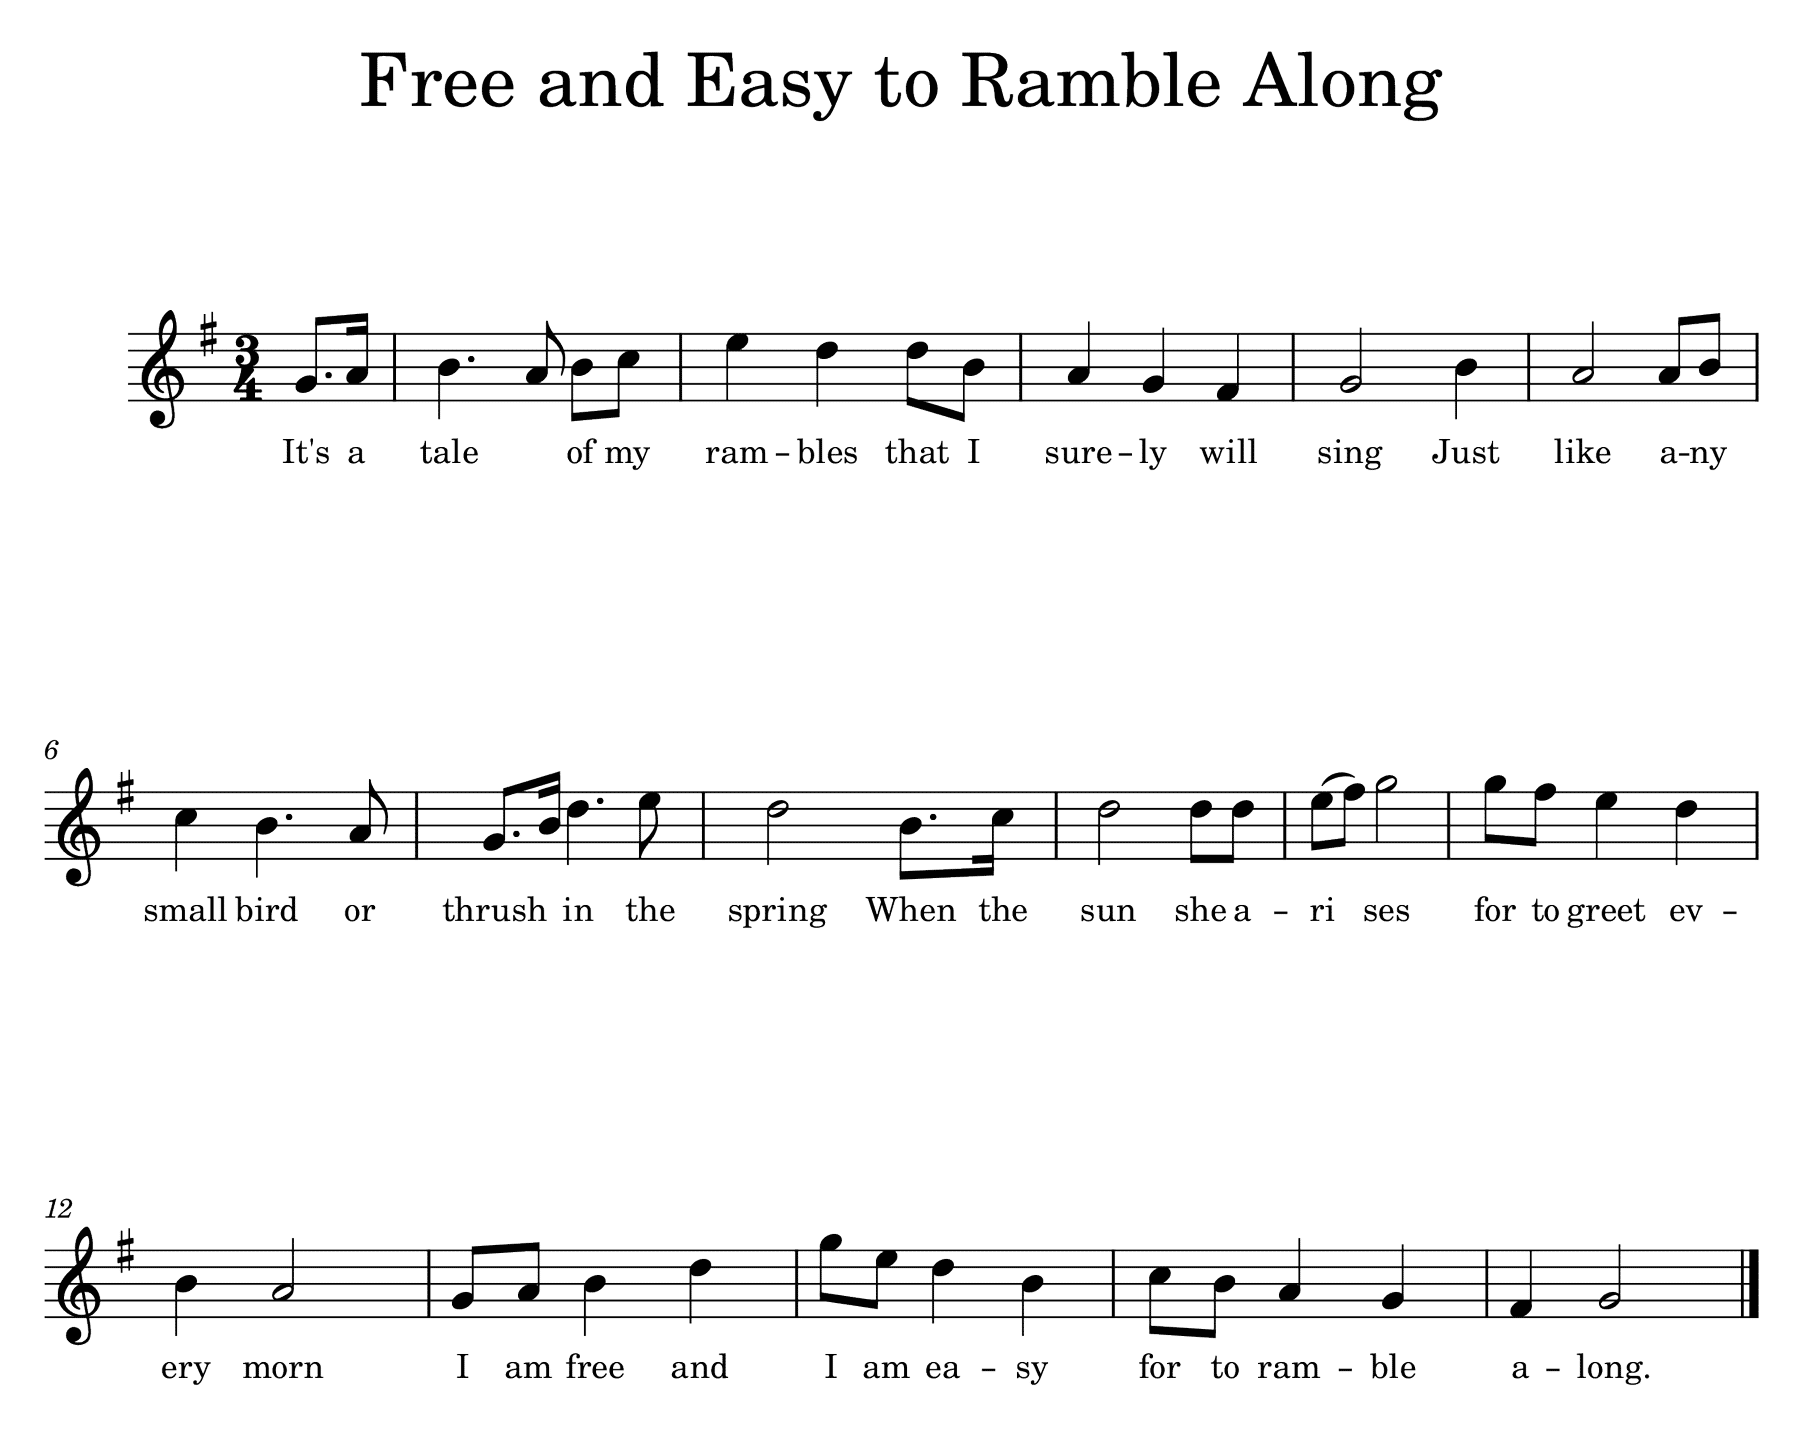 Sheet music for 'Free and Easy to Ramble Along'